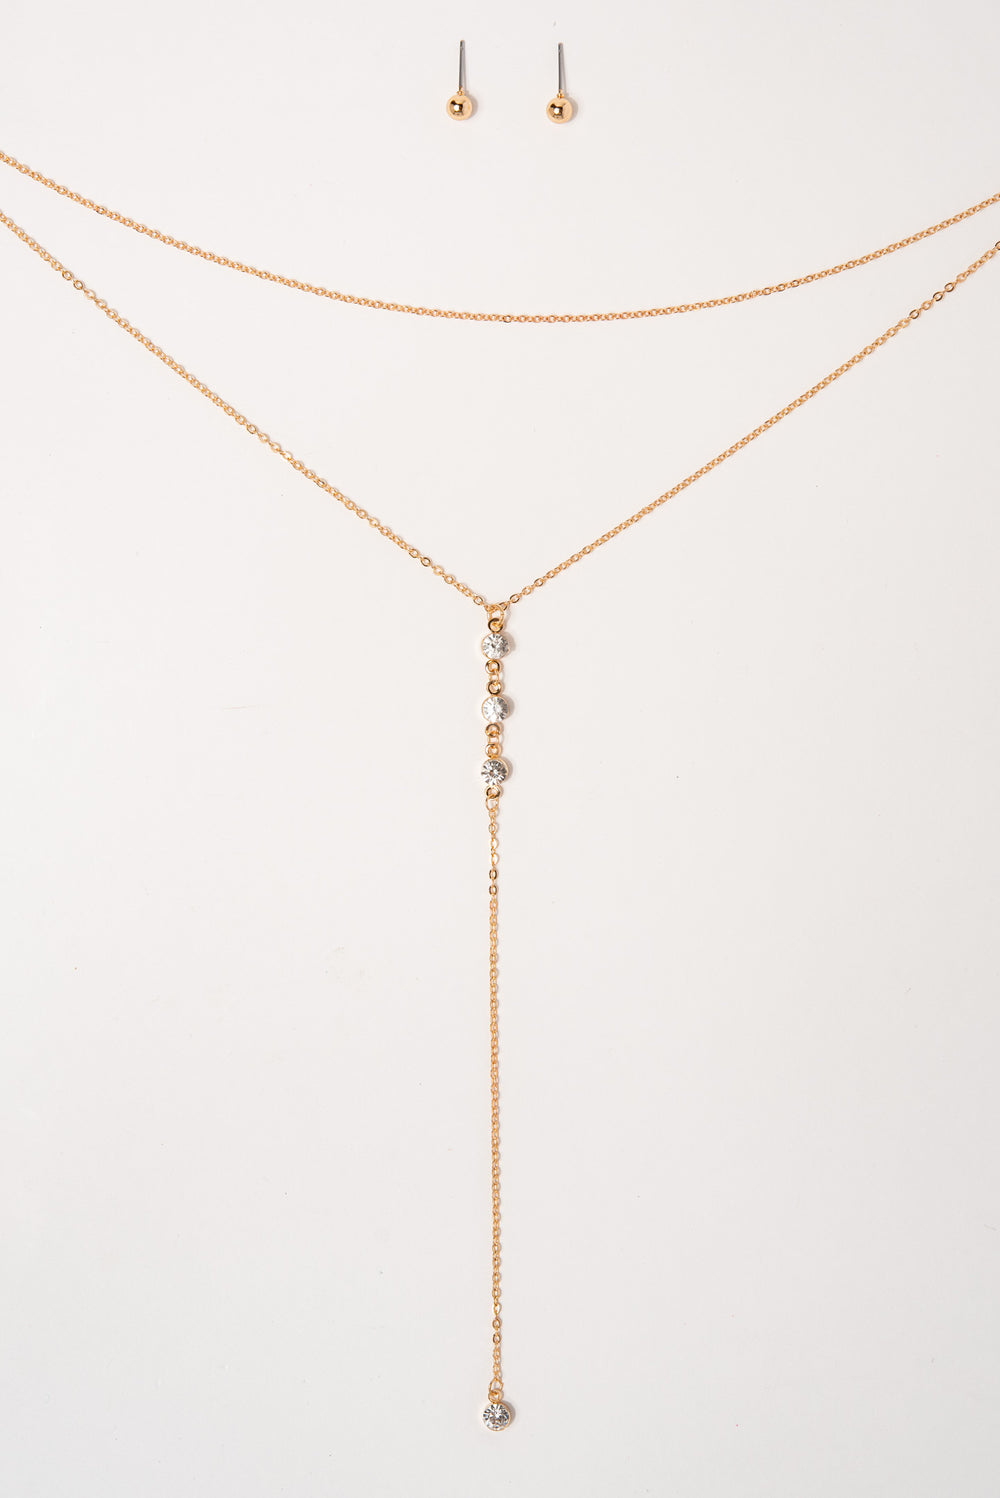 Ivy Multi Strand Lariat Chain Necklace Set - Crystal